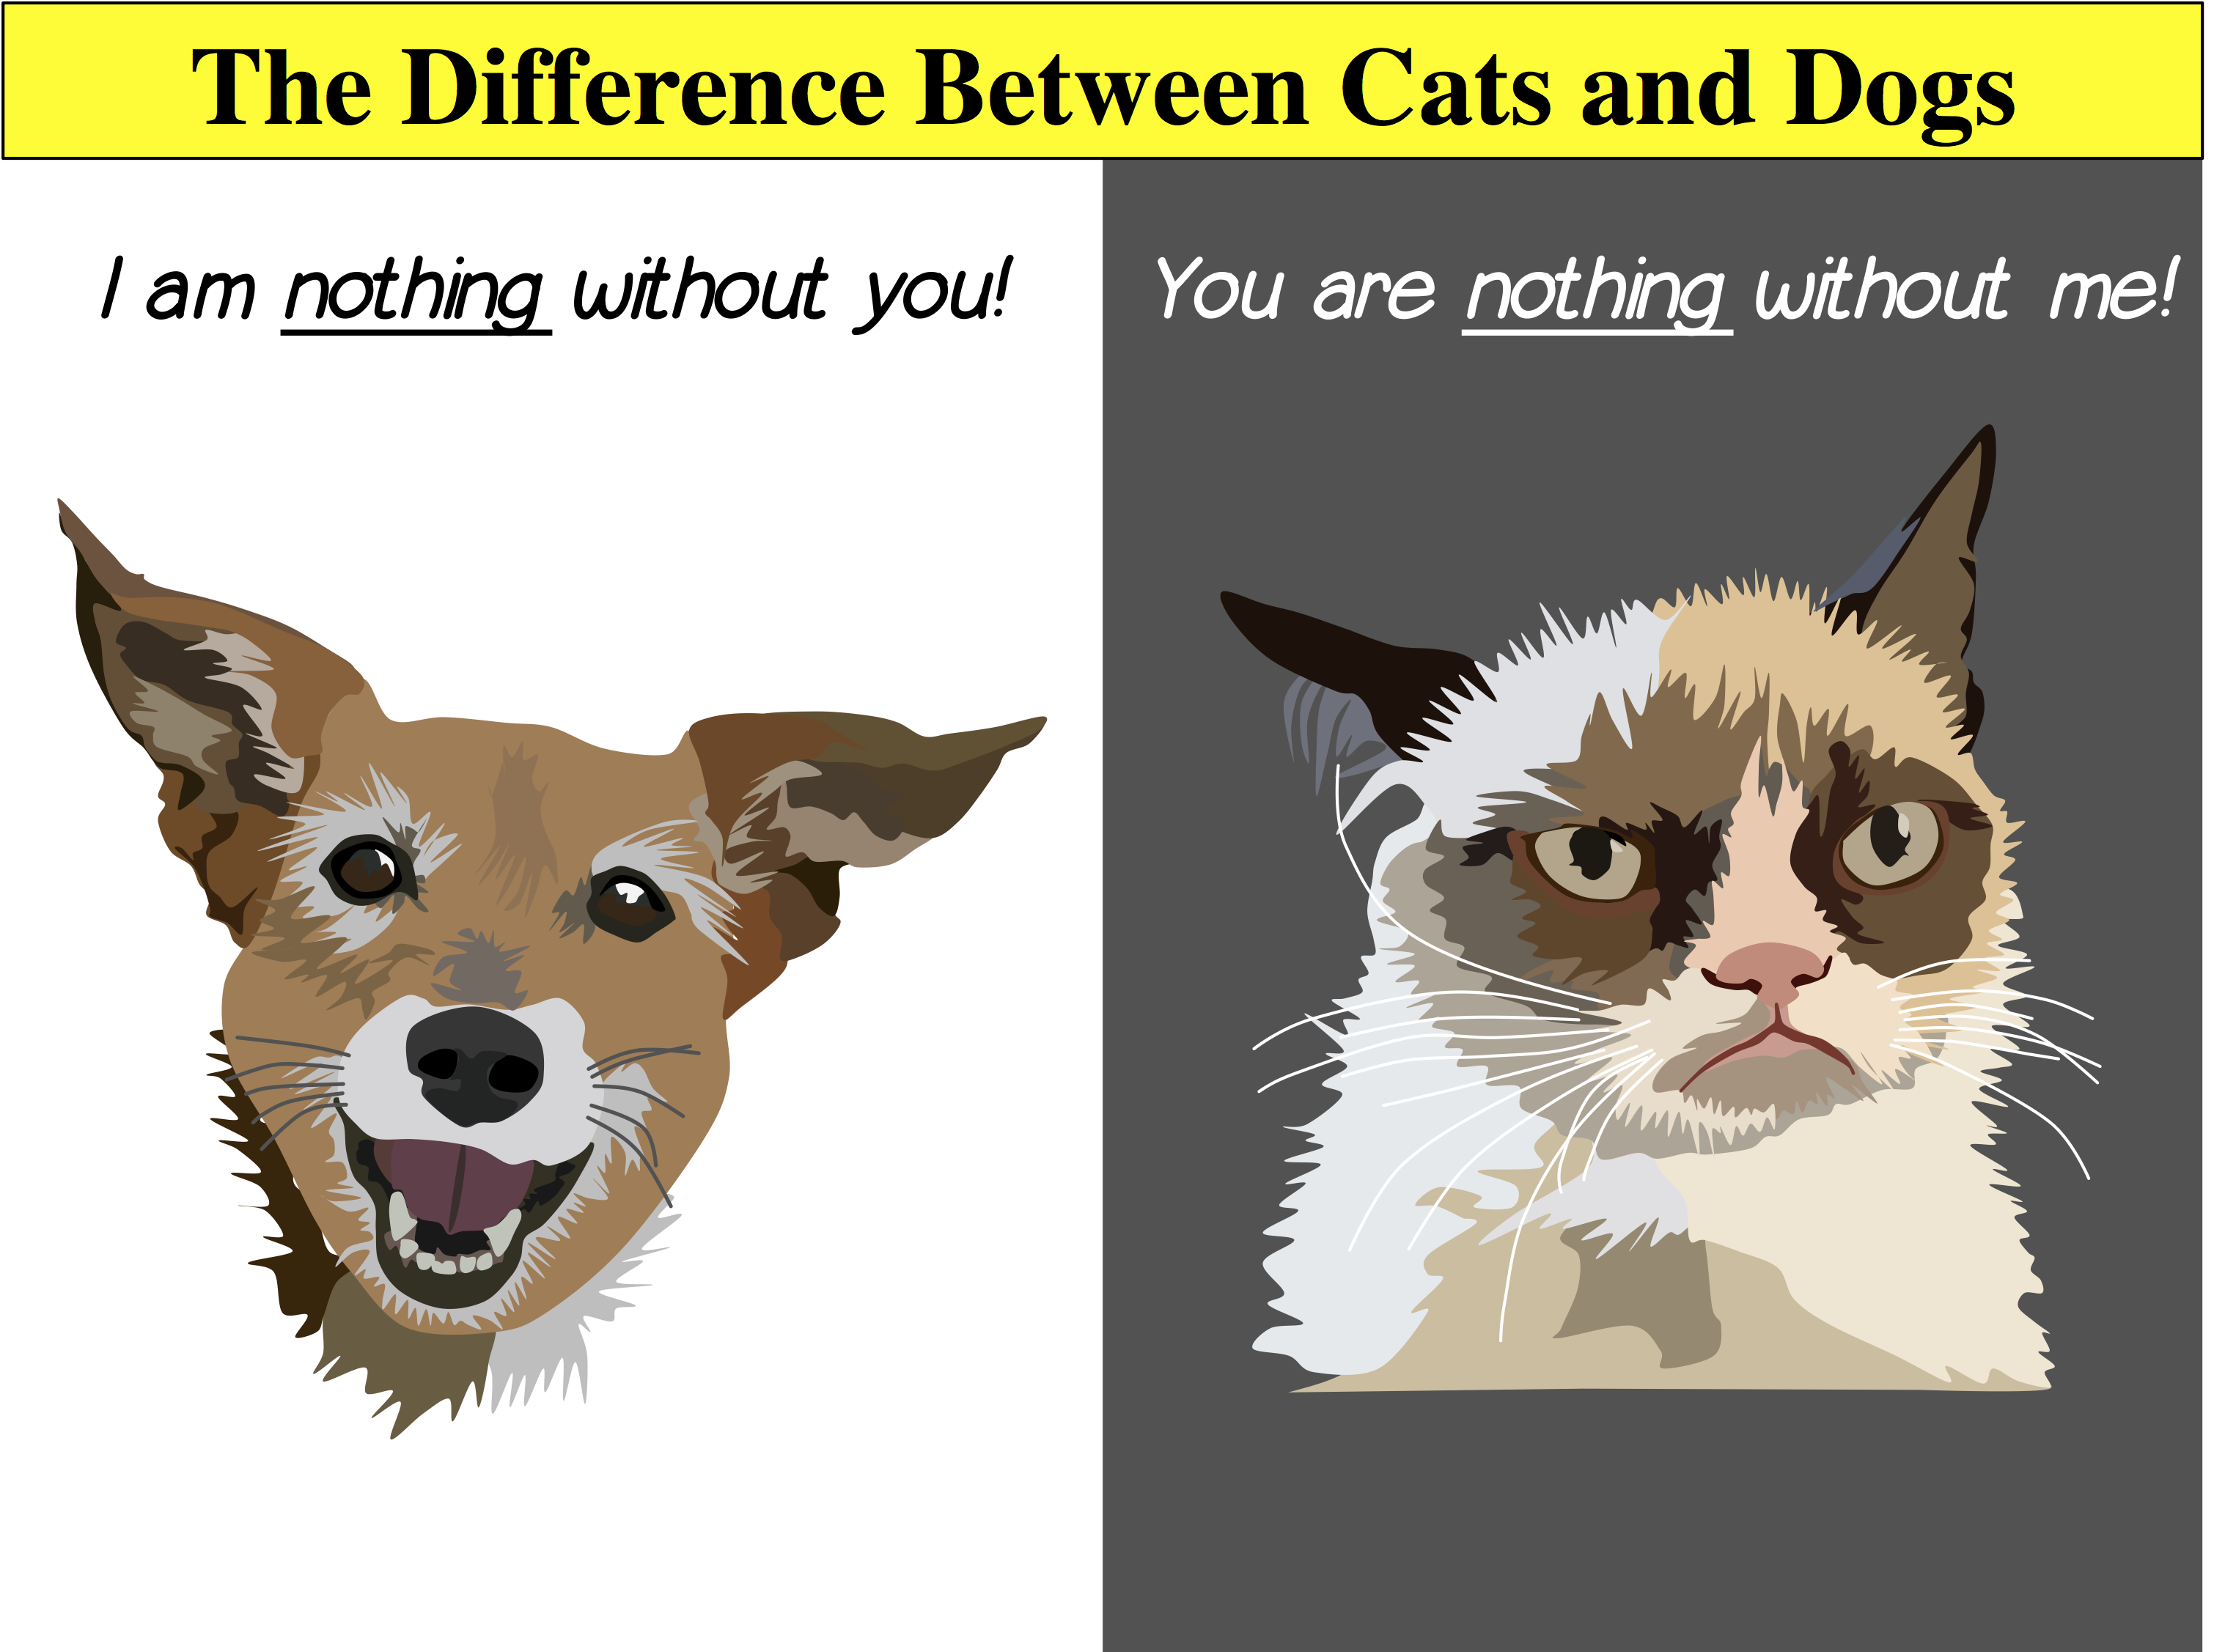 Cats vs. Dogs; Dog - I'm nothing without you.  Cat - You're nothing without me.